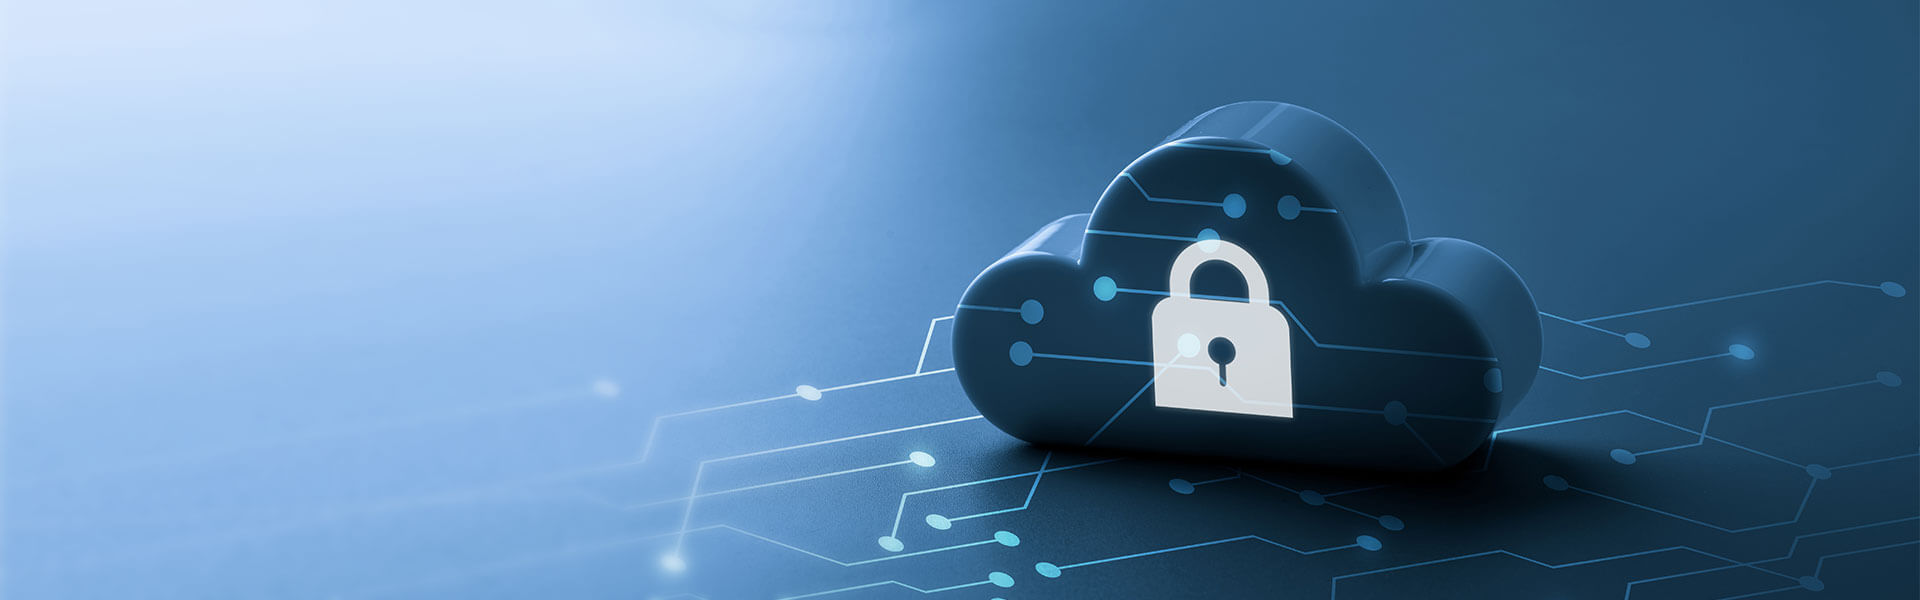 Cloud-Infrastructure-Security-Solution_Banner